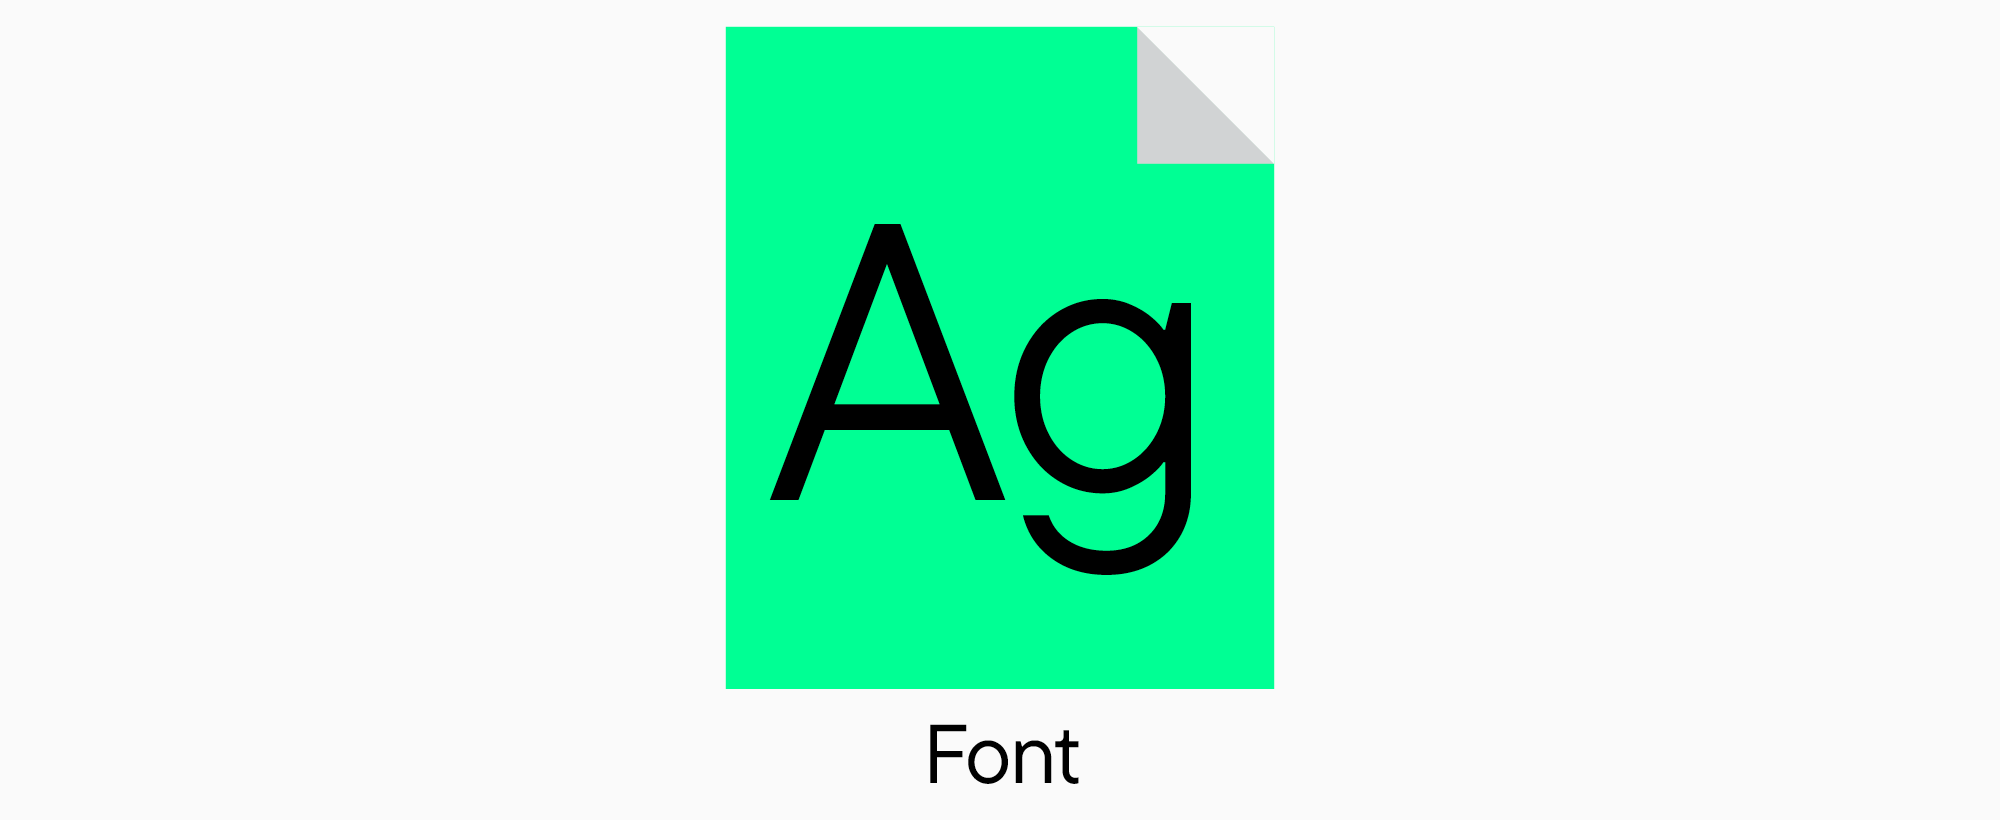 Font and Typeface: What&#8217;s the difference?